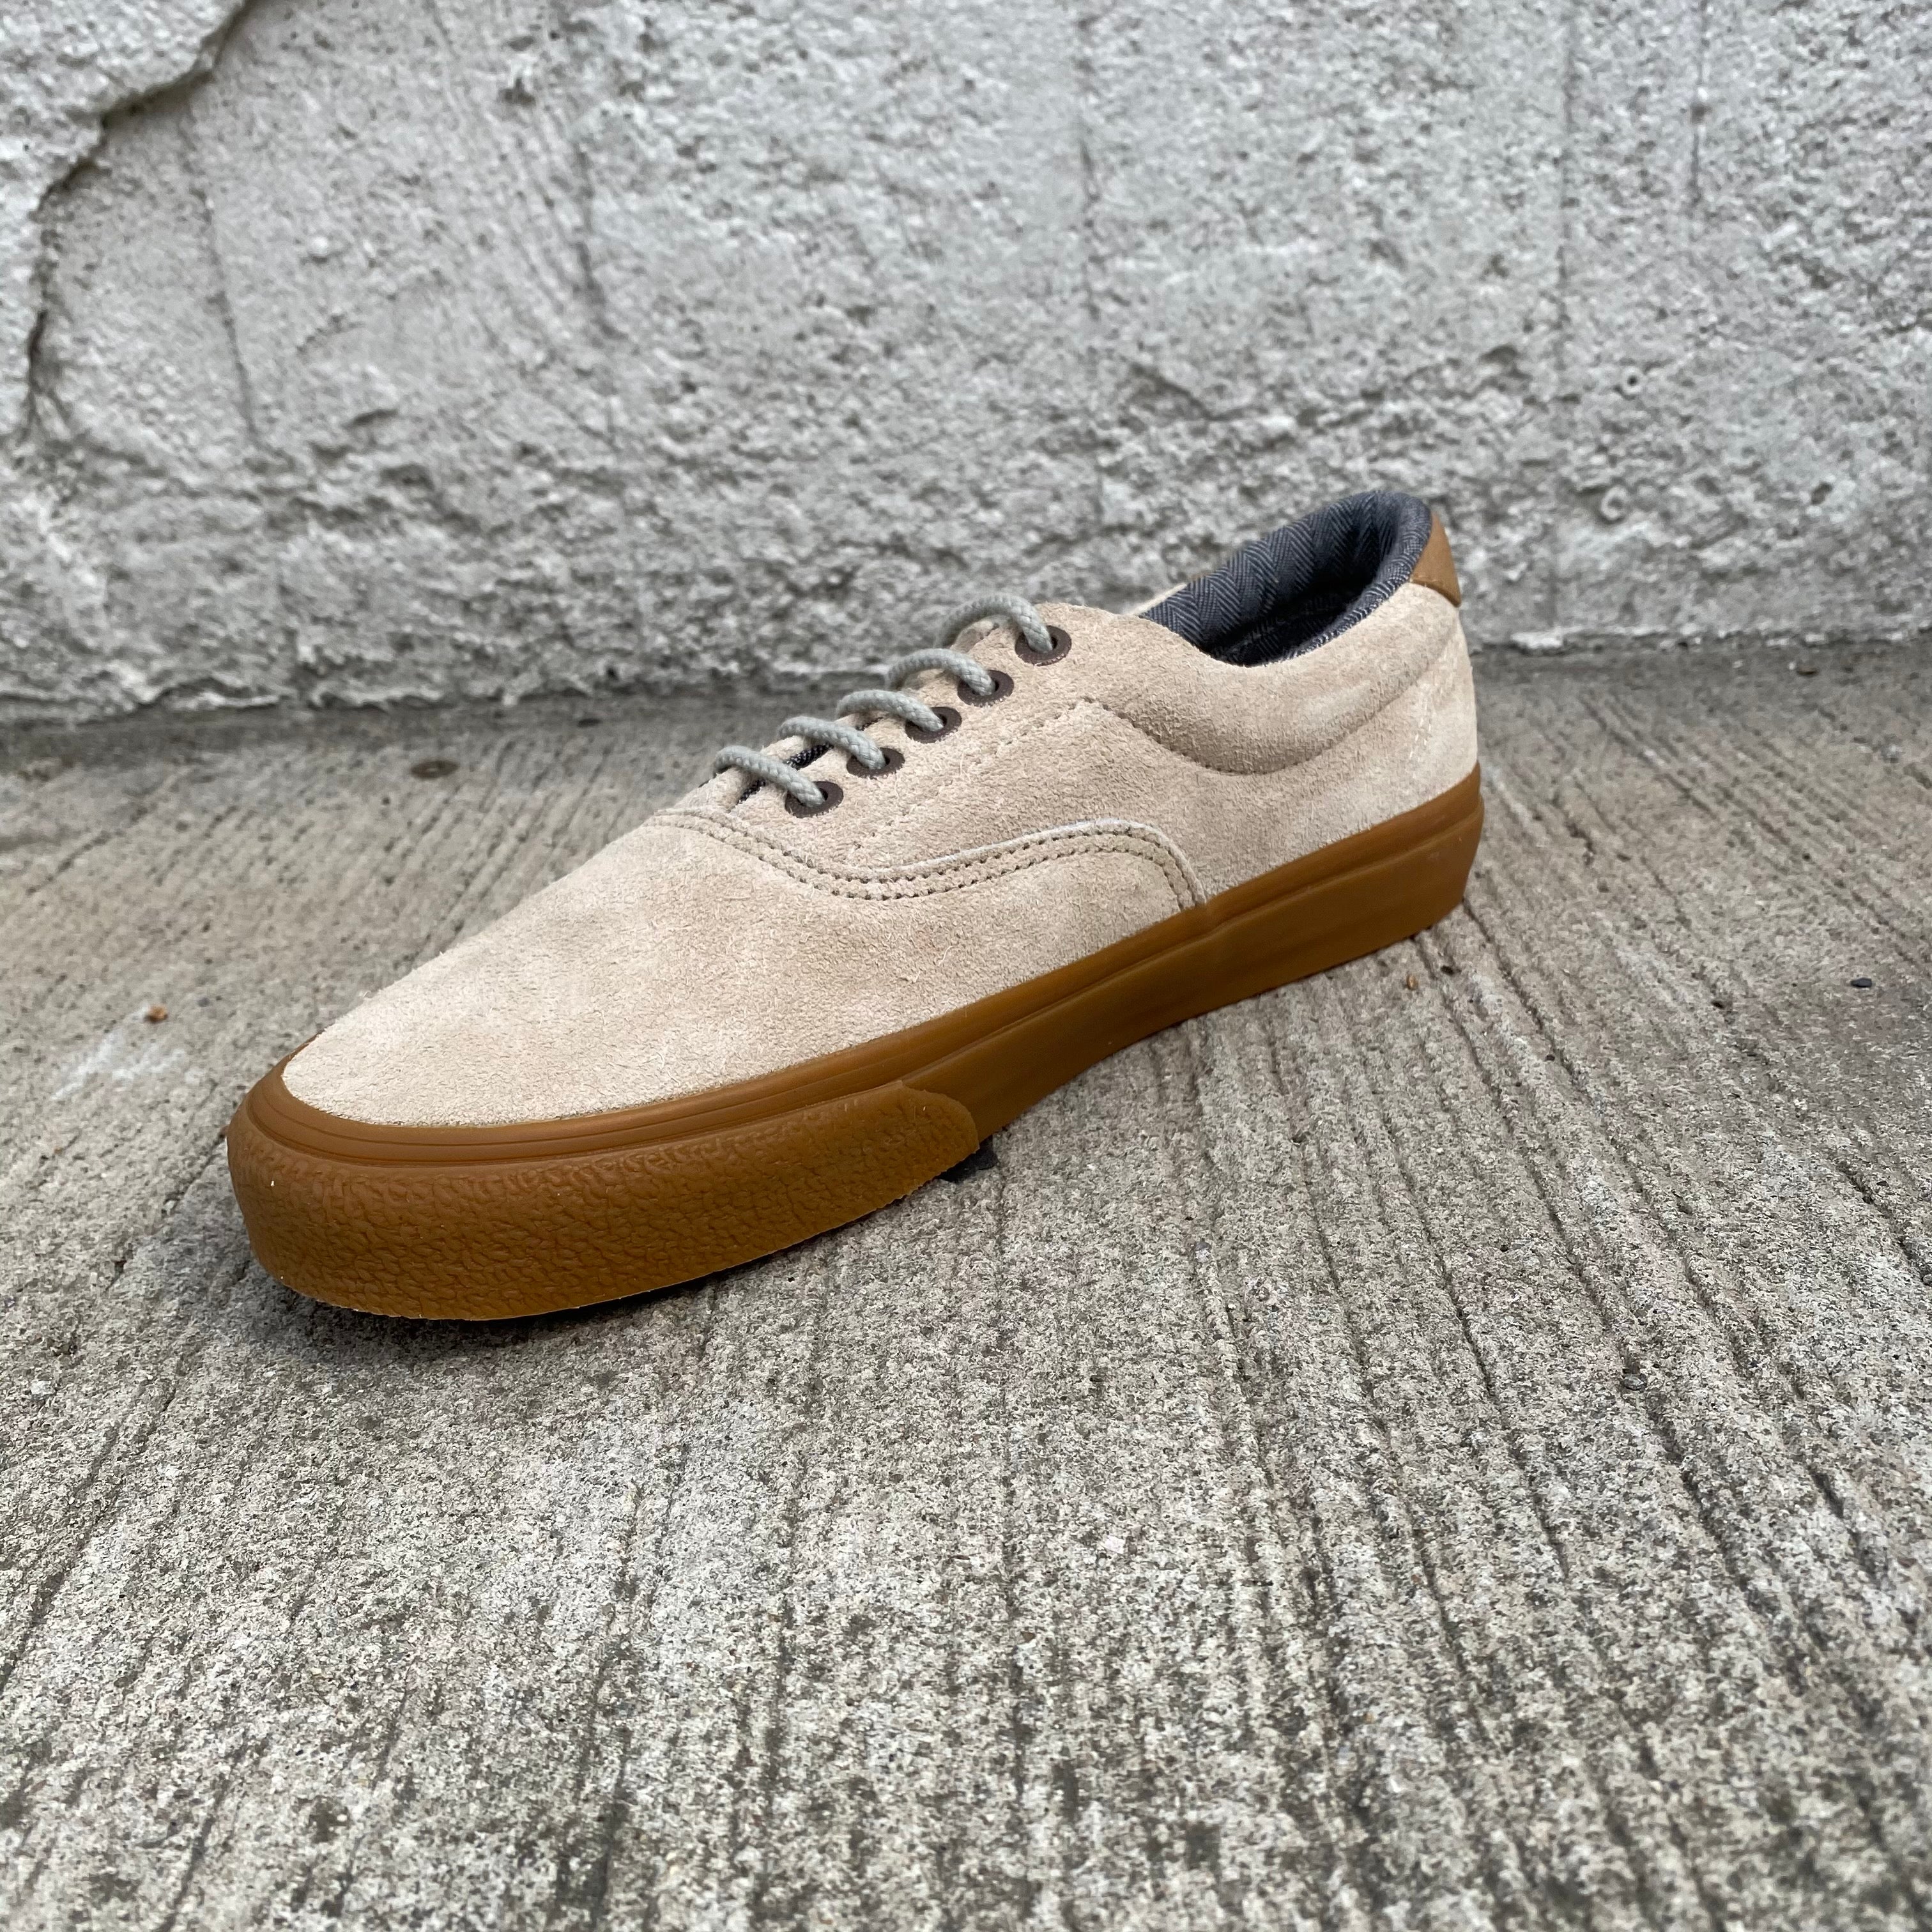 [FINAL ONE!] Era 59 CA (Hairy Suede) -VANS CALIFORNIA COLLECTION-